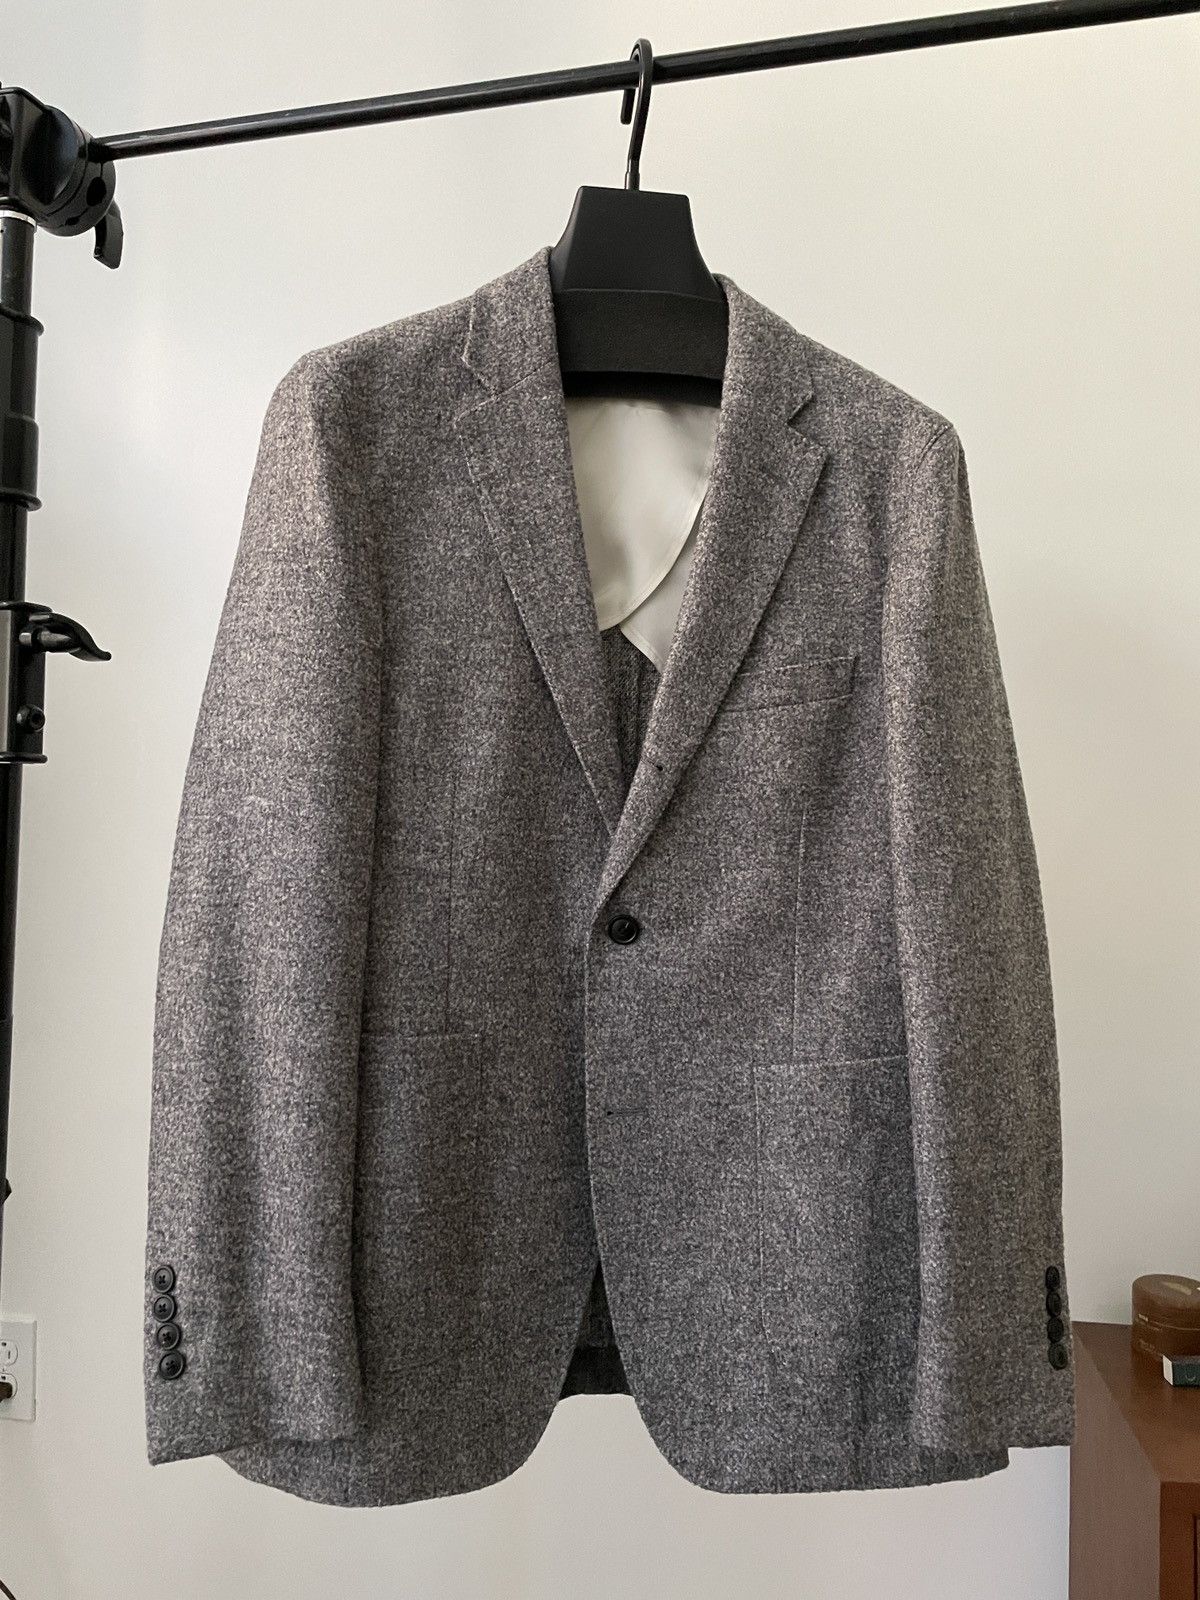 Todd Snyder Todd Snyder Grey Boucle Sport Coat | Grailed